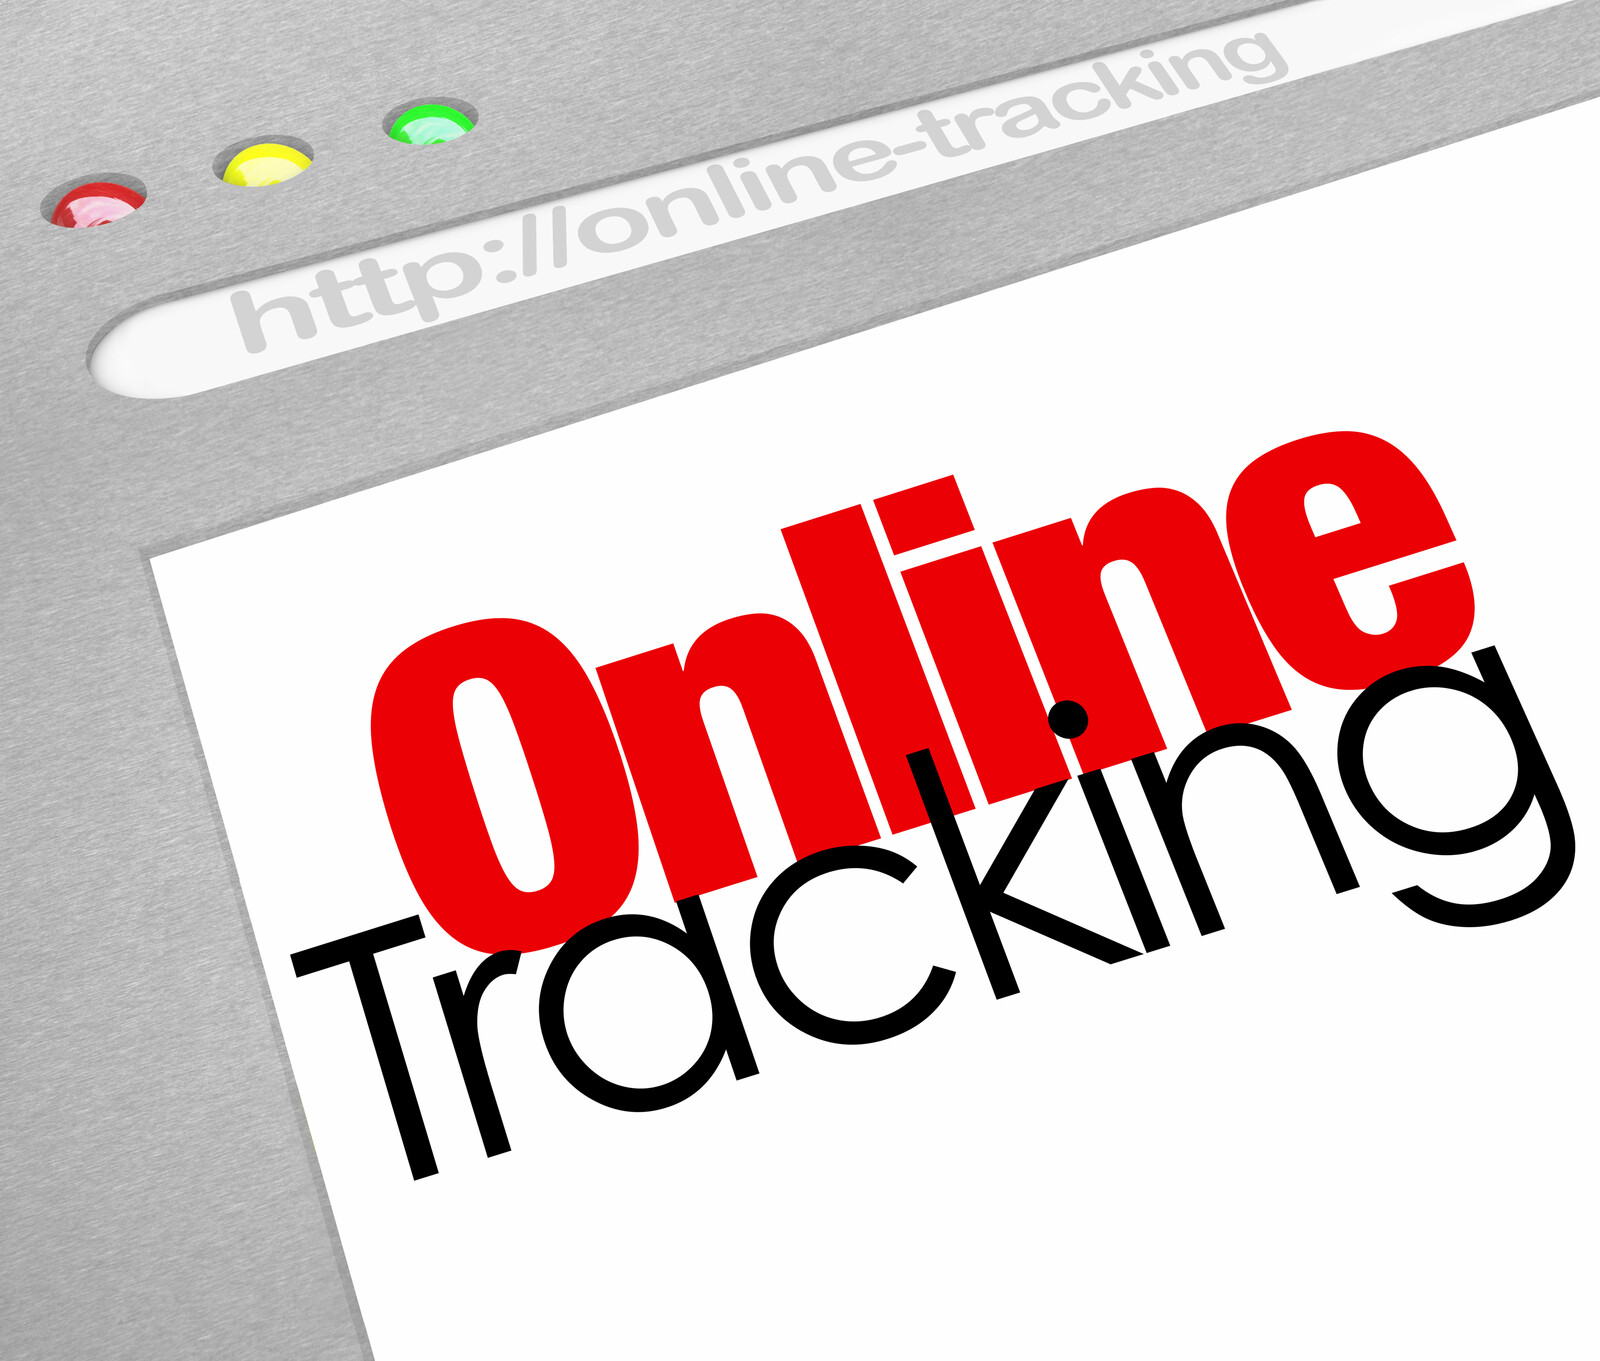 Common online tracking technology that could lead to a HIPAA violation